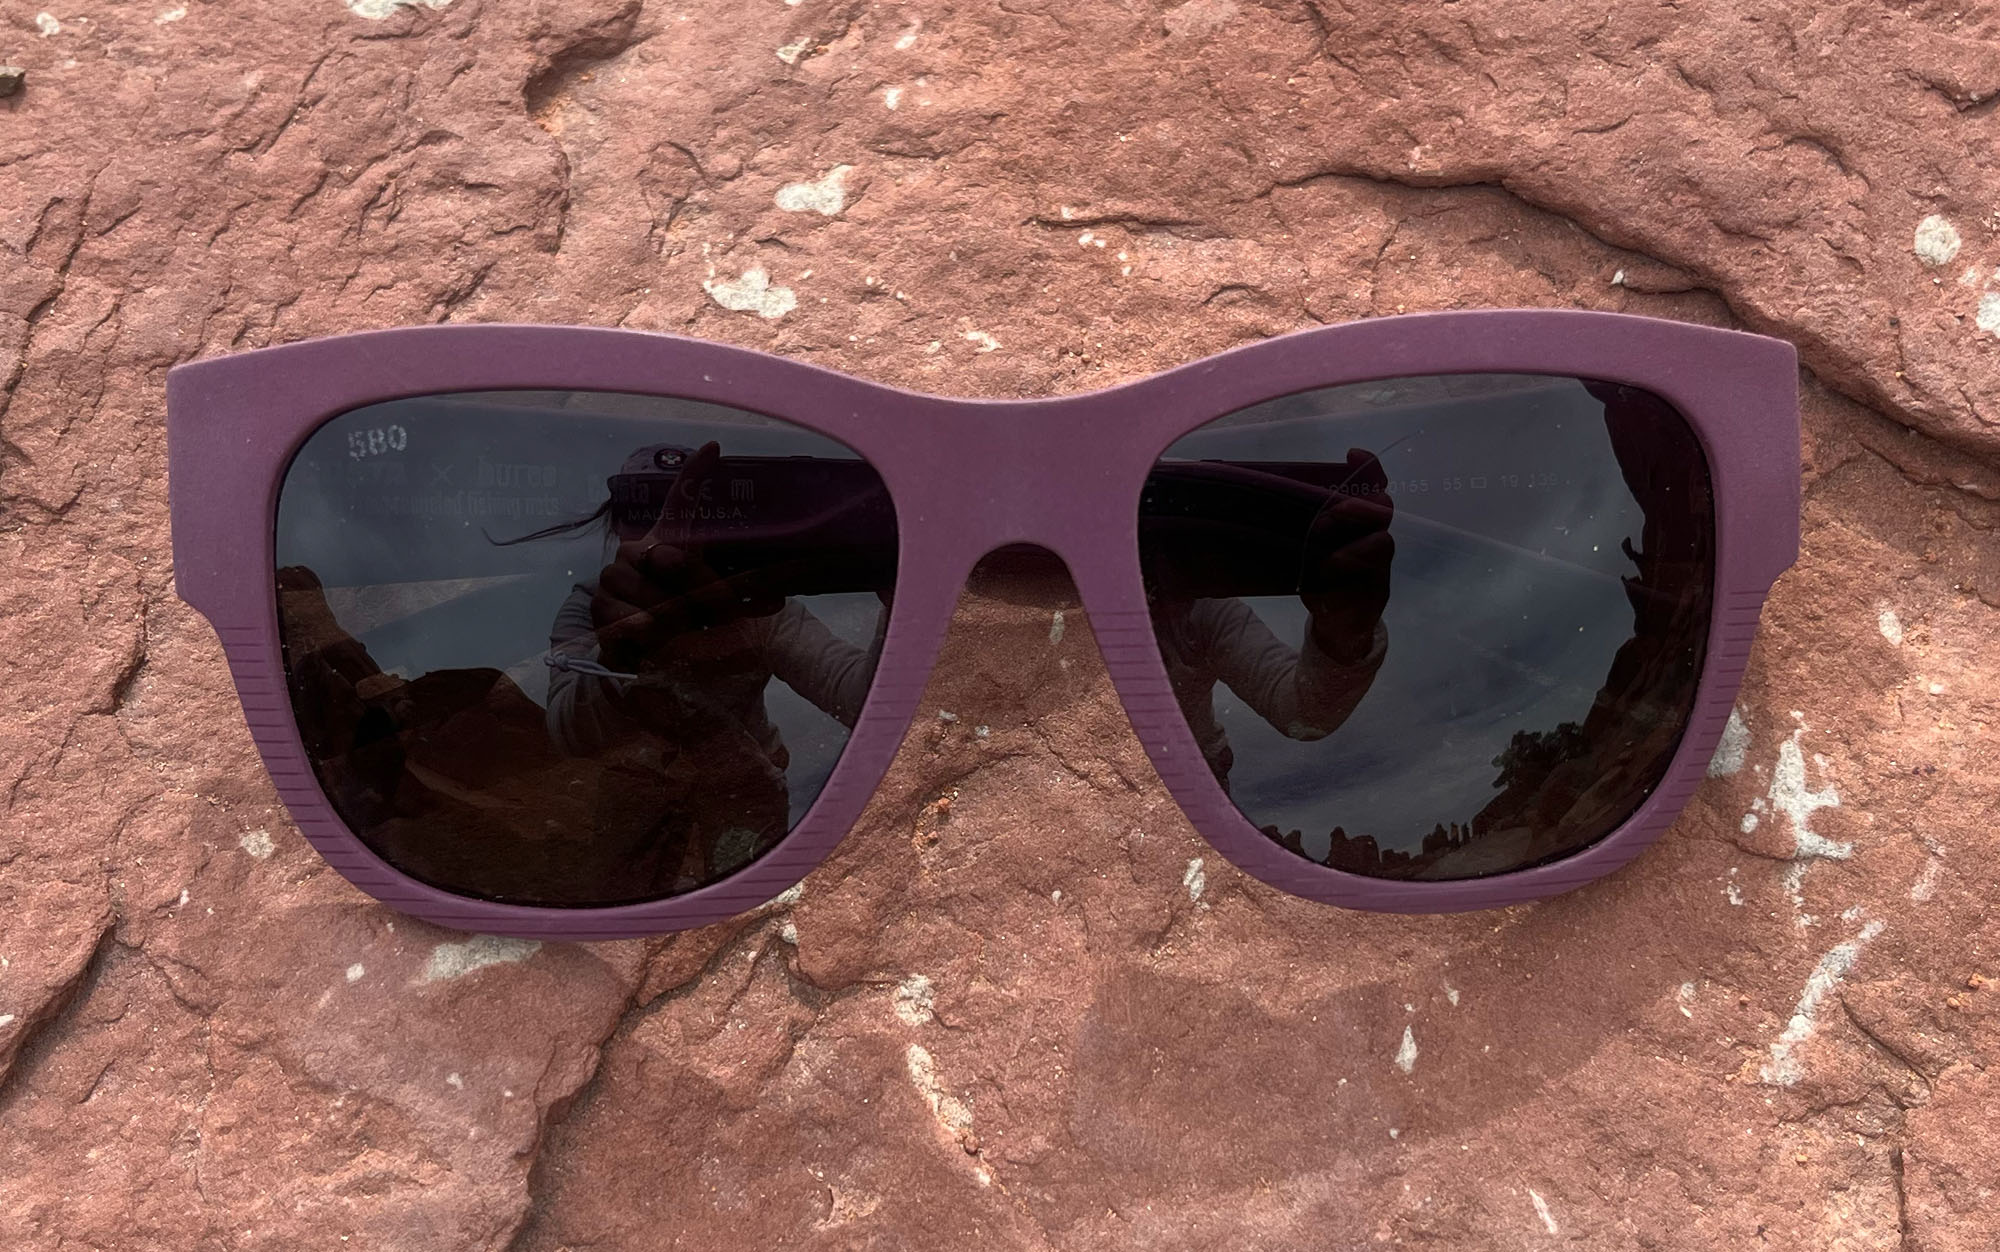 The Costa Caleta are the best overall hiking sunglasses.